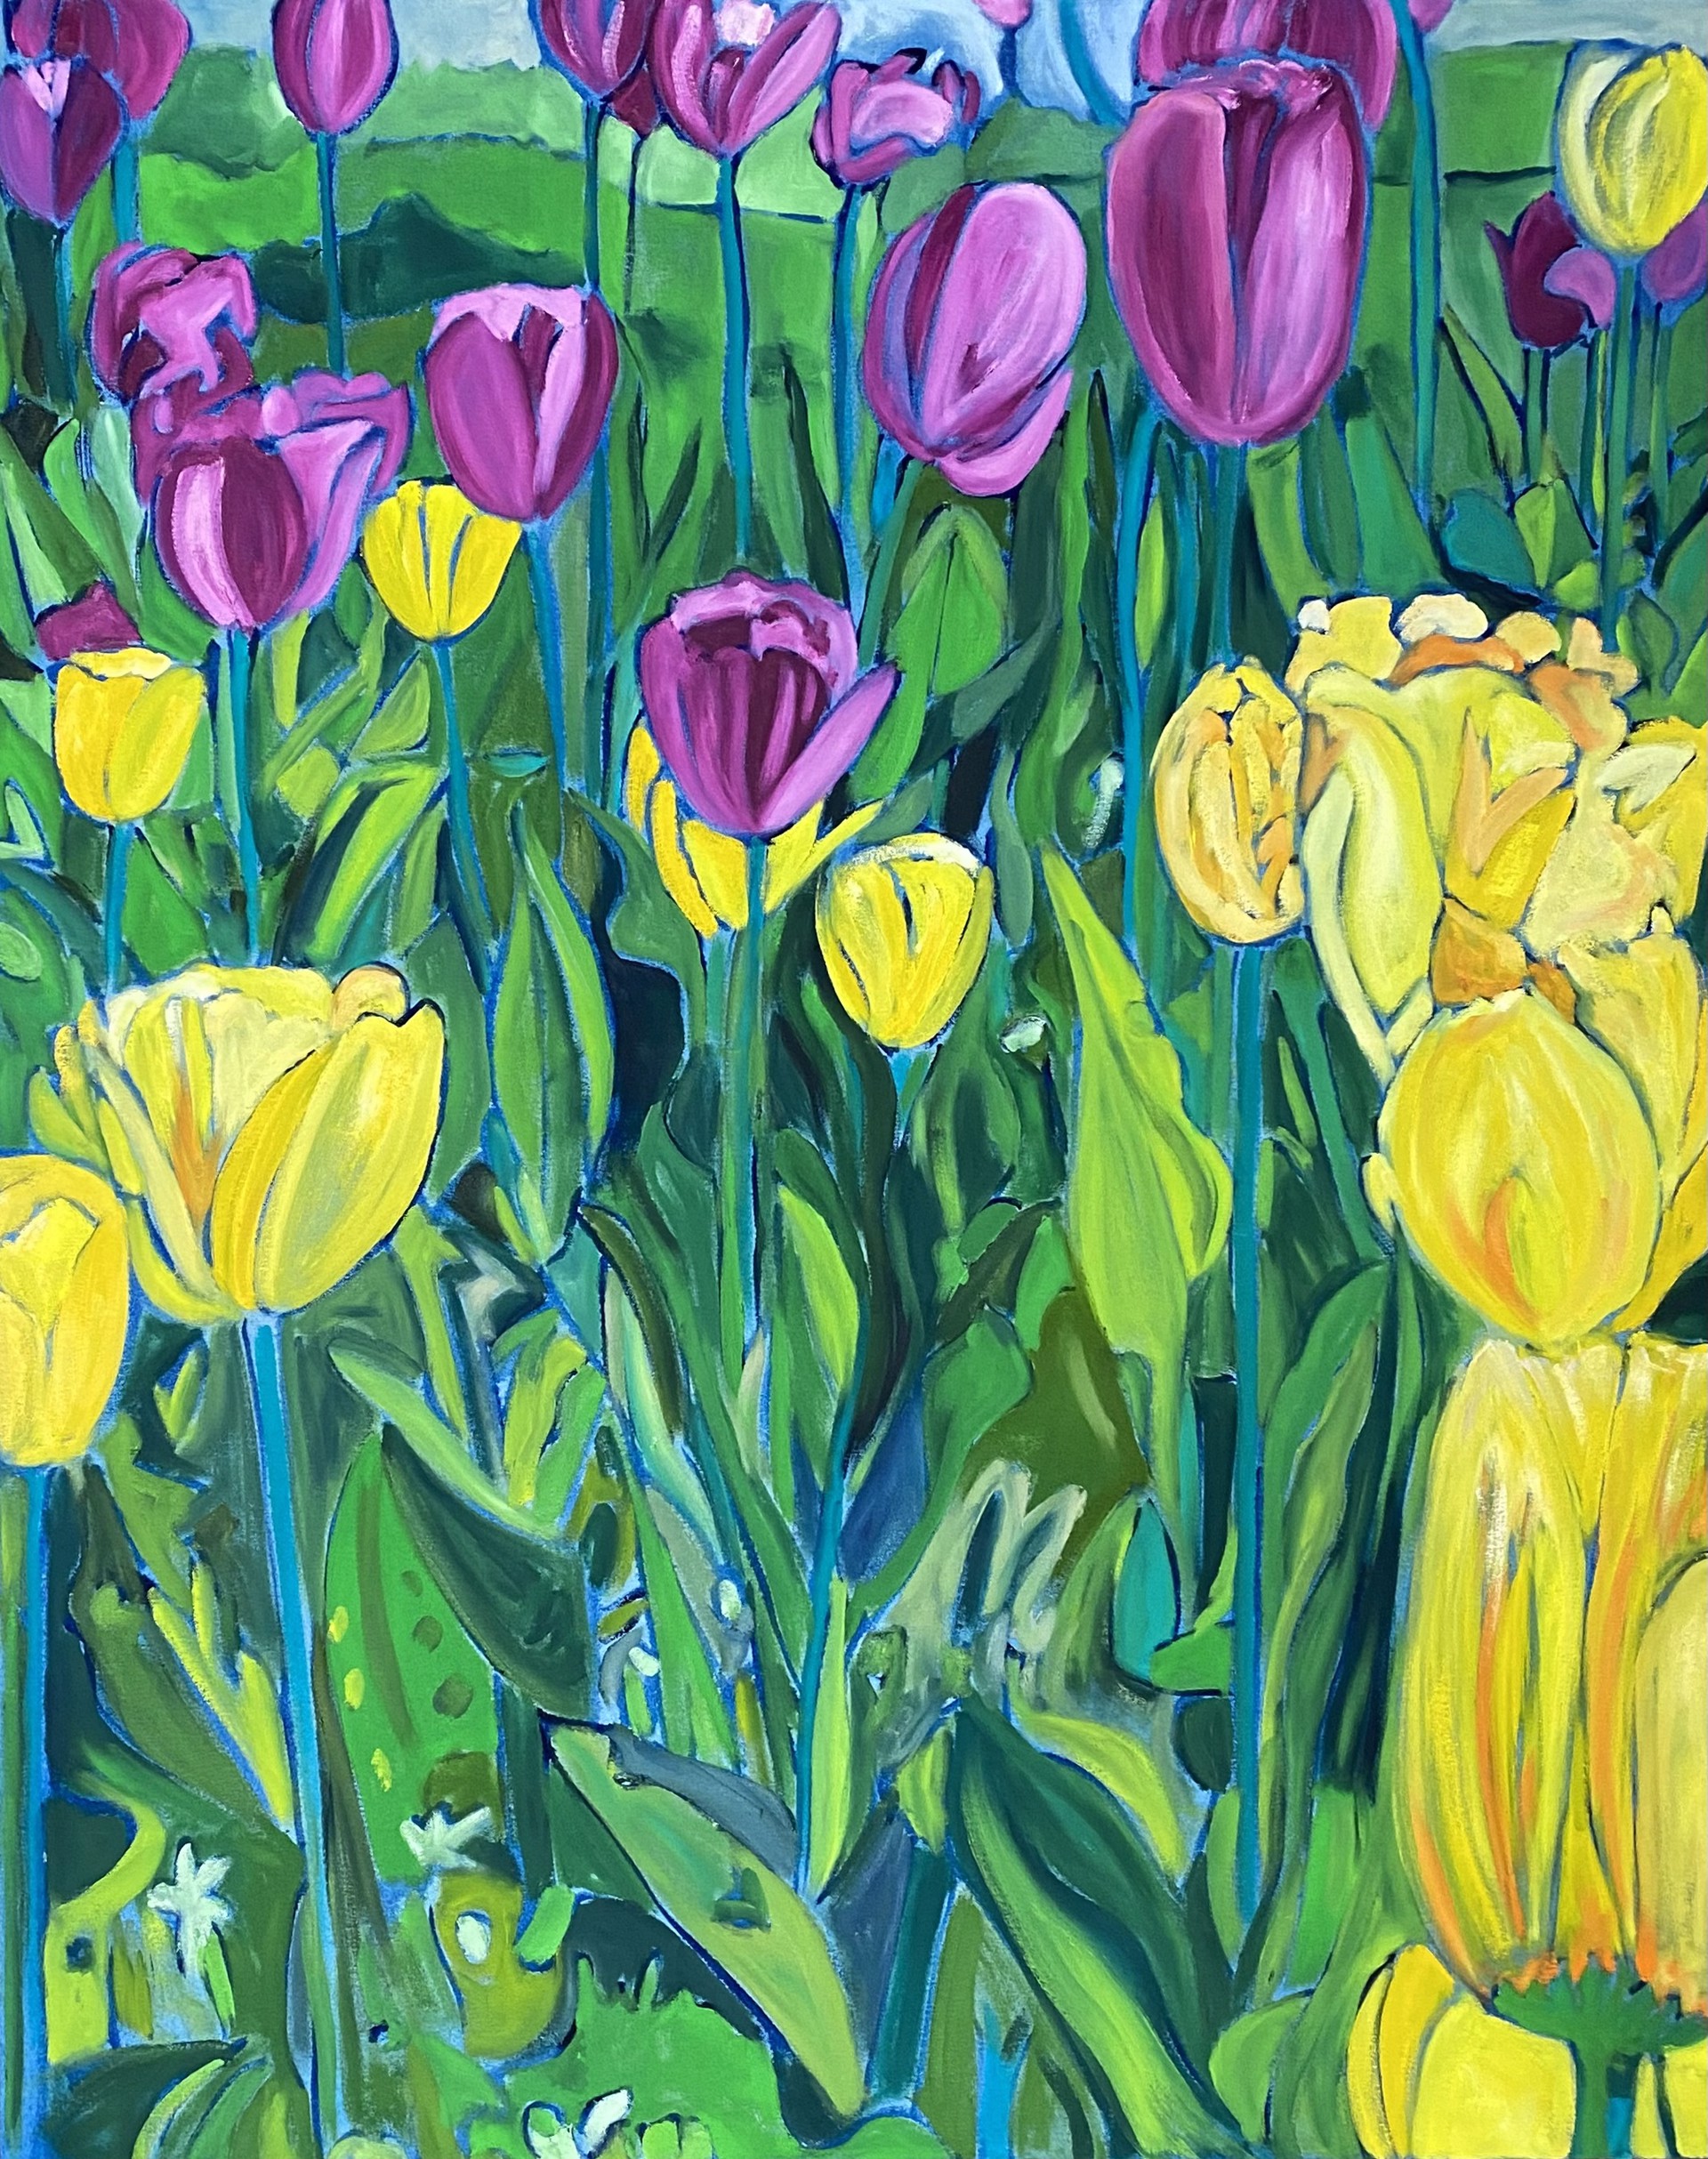 Tulips by Maggie Bandstra